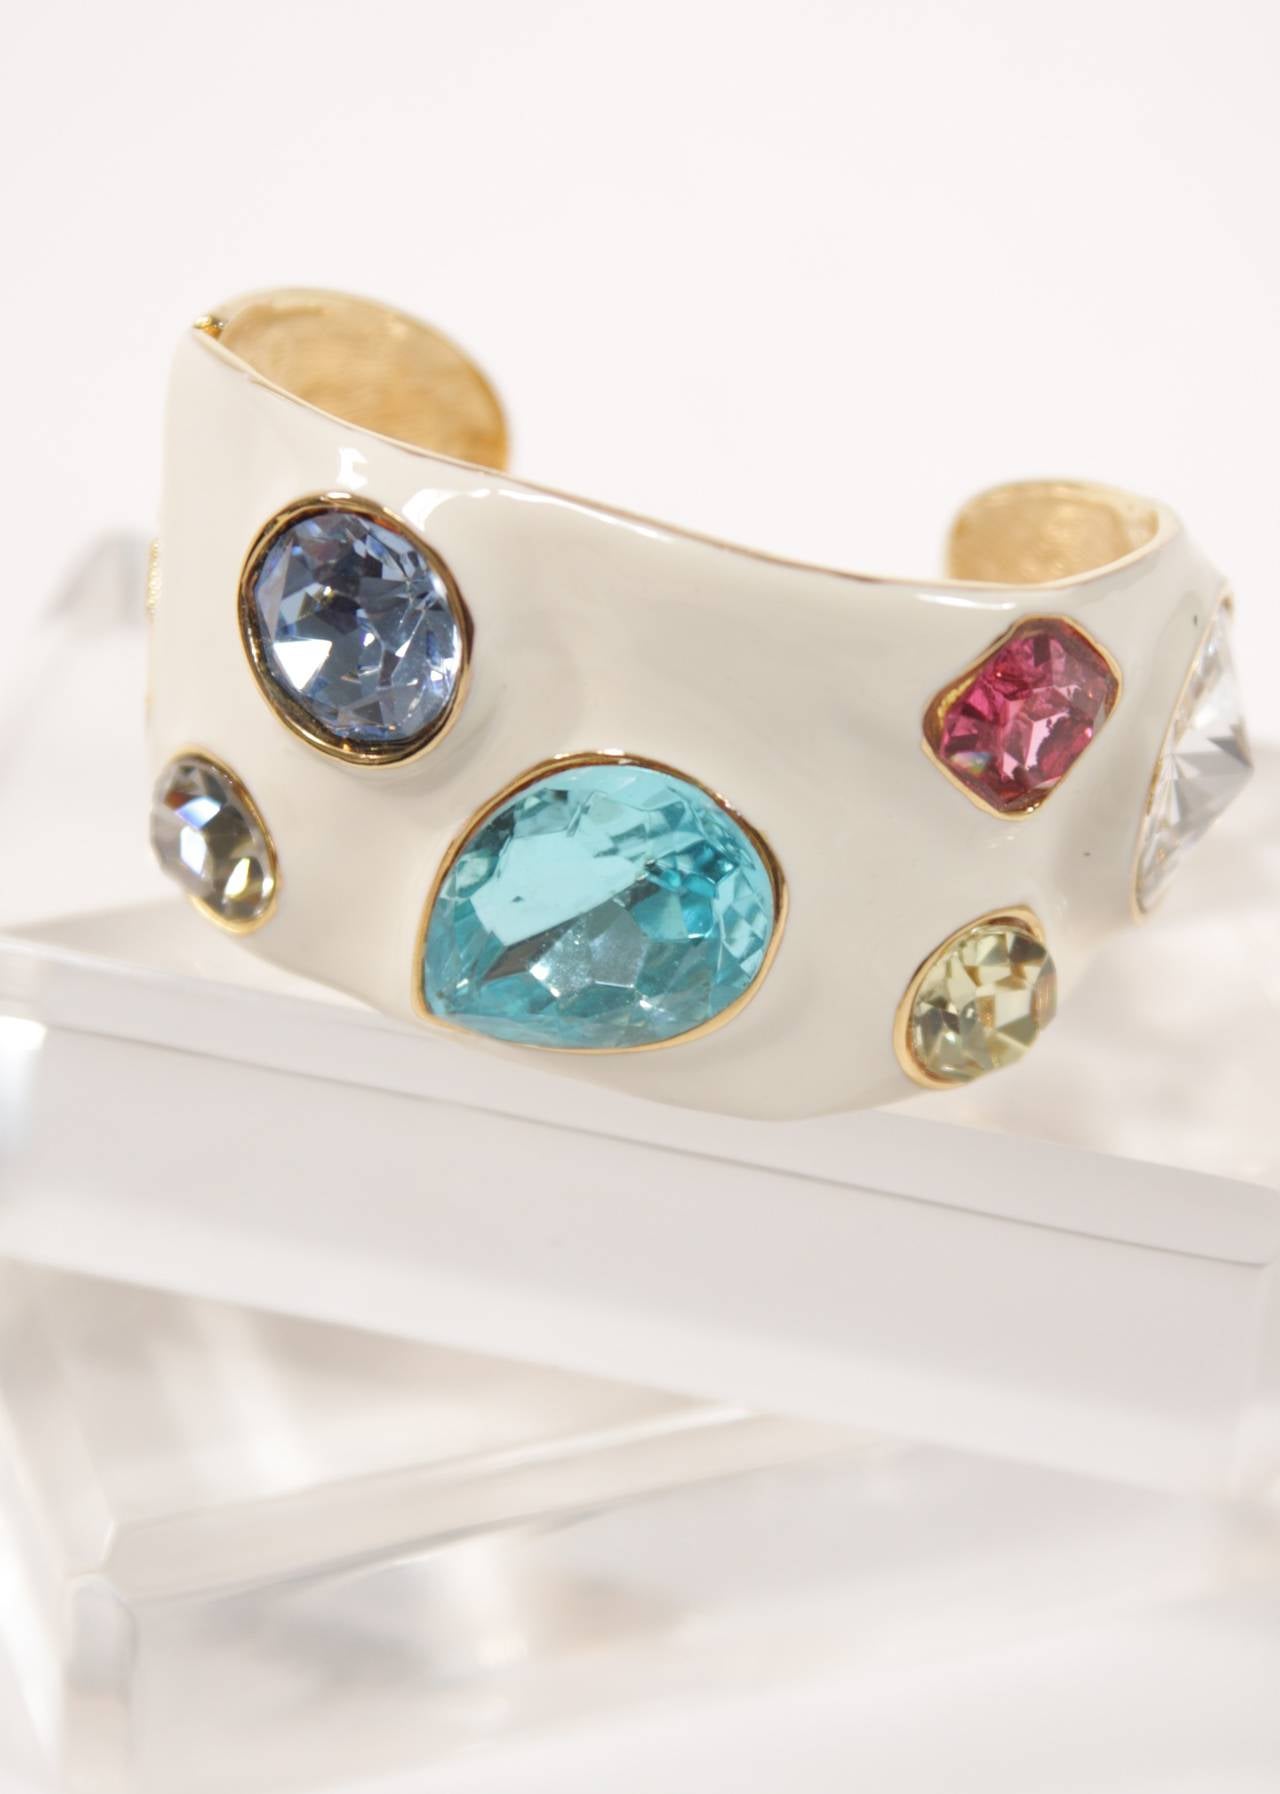 This fabulous Kenneth Lane bracelet is composed of enamel and set with large rhinestones. Features a hinged opening. Measures 1.5